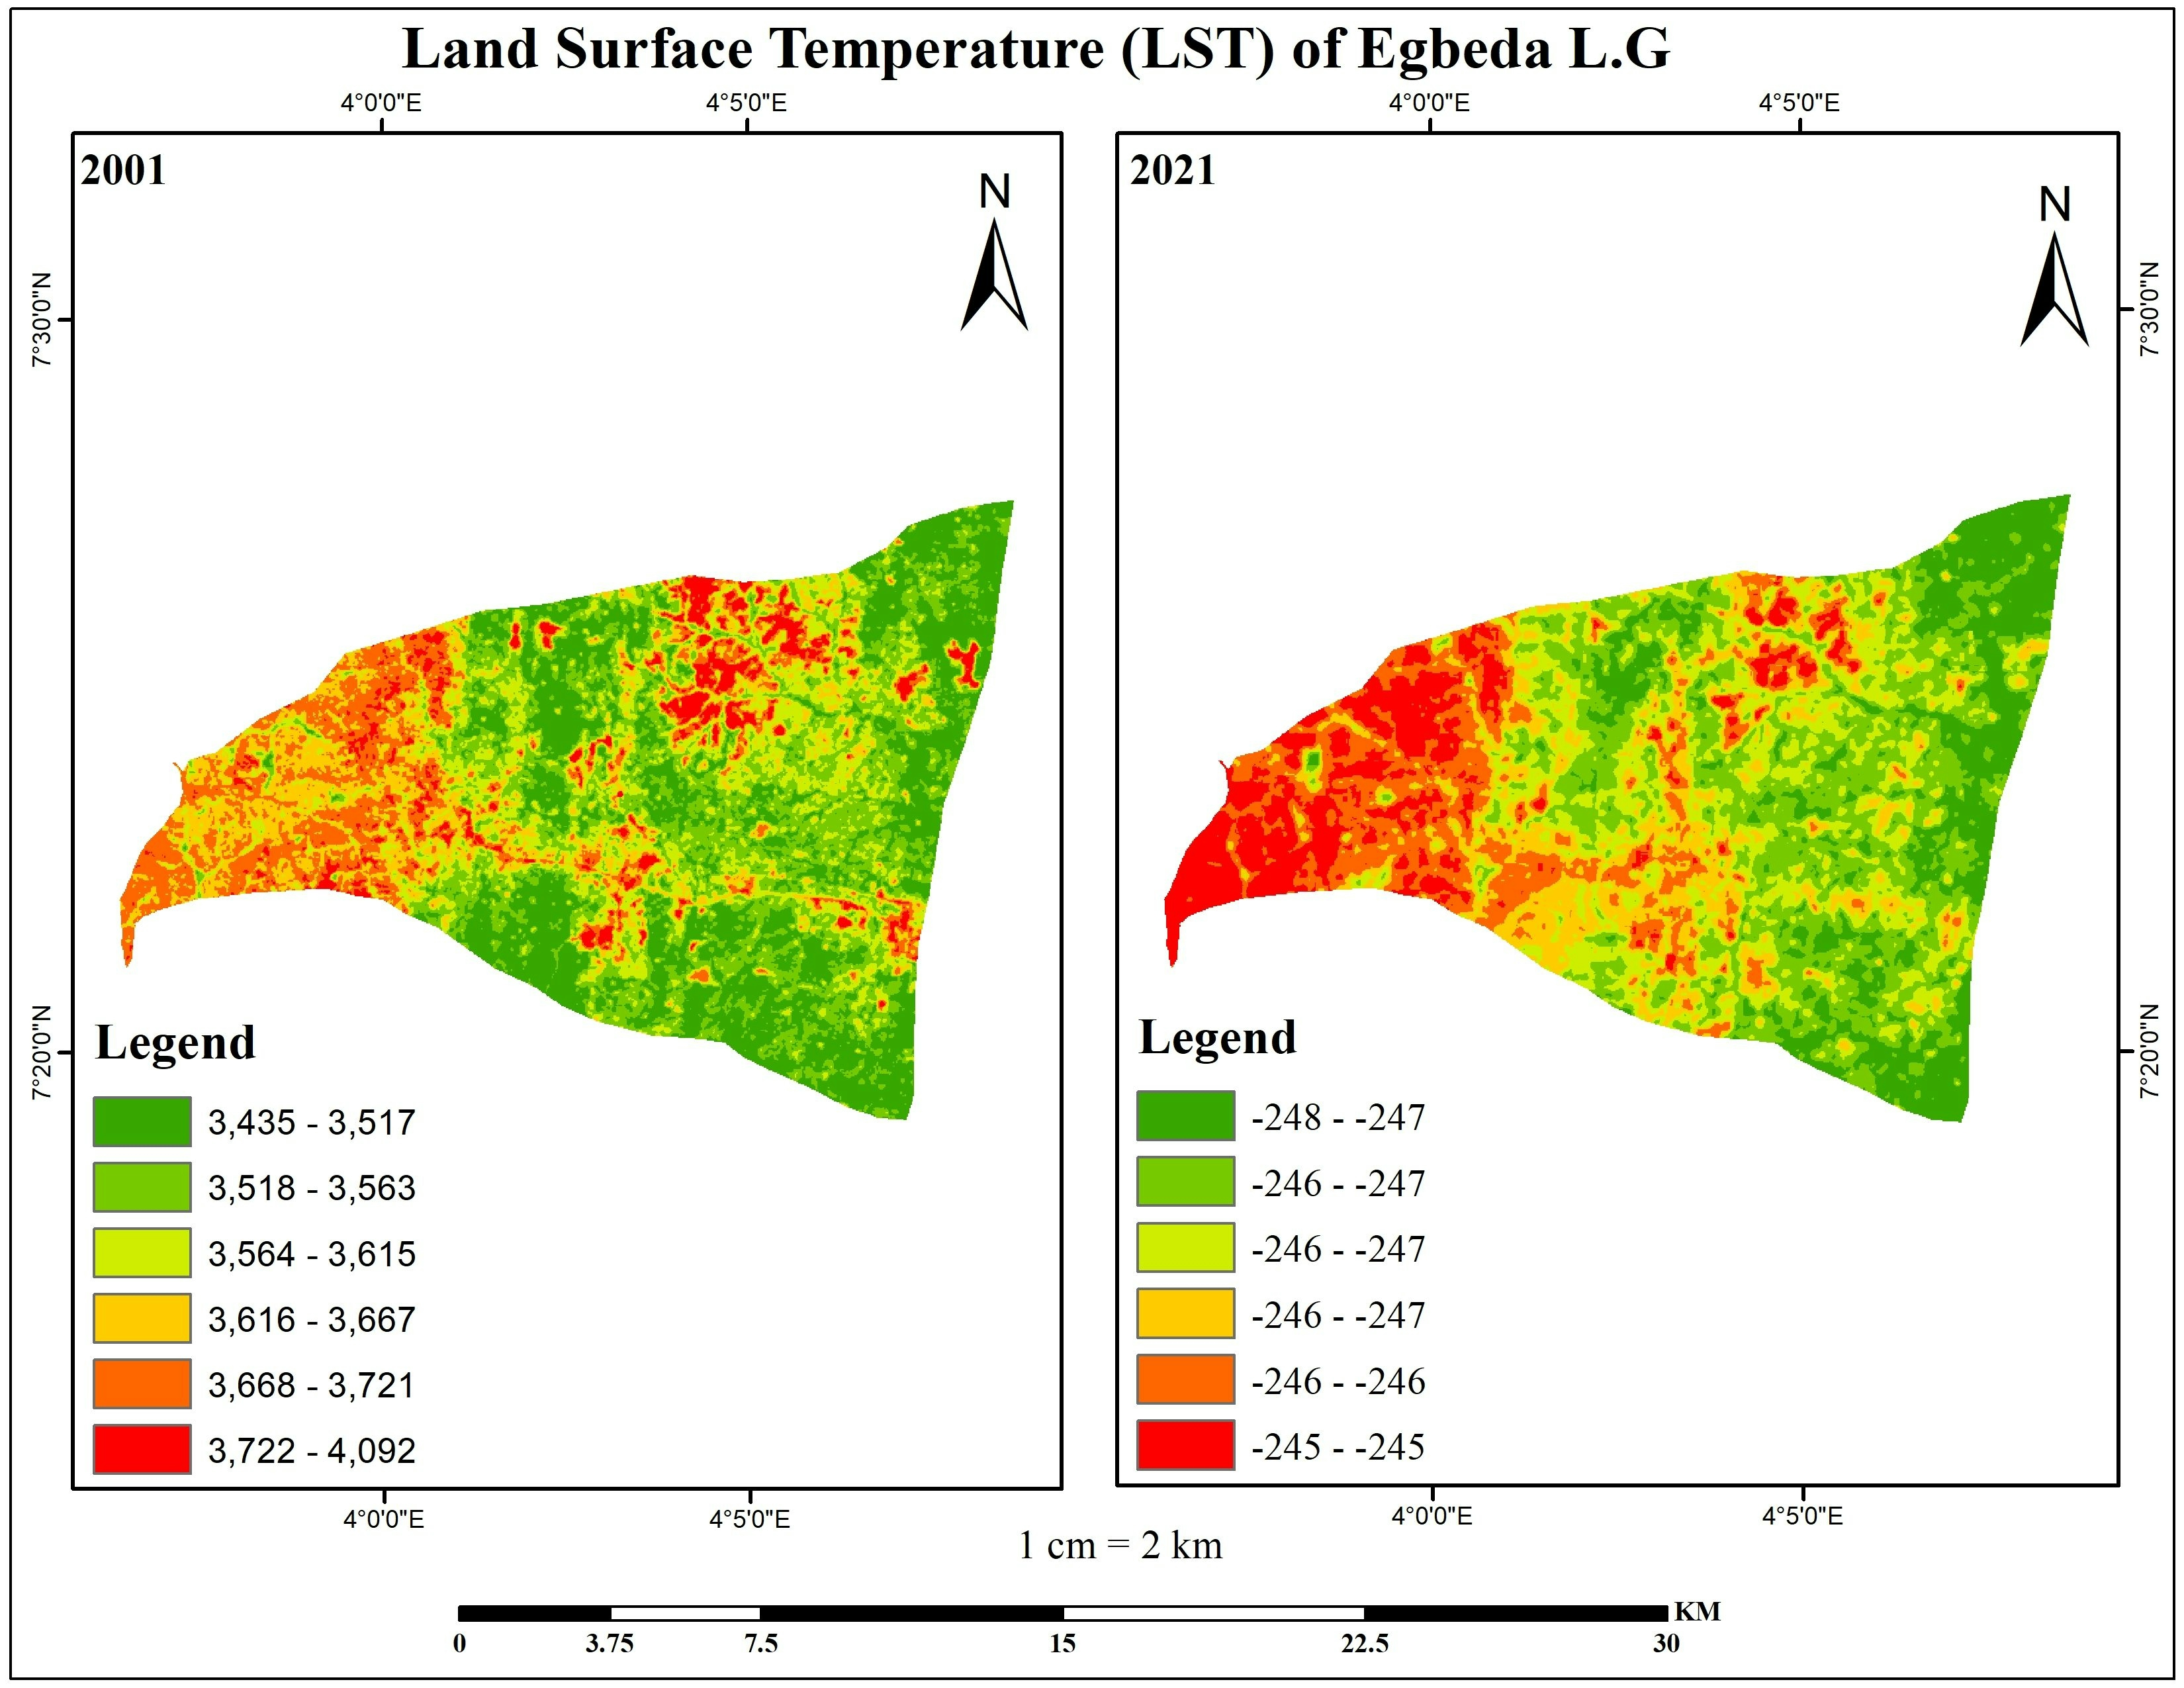 LAND SURFACE TEMPERATURE OF EGBEDA L.G